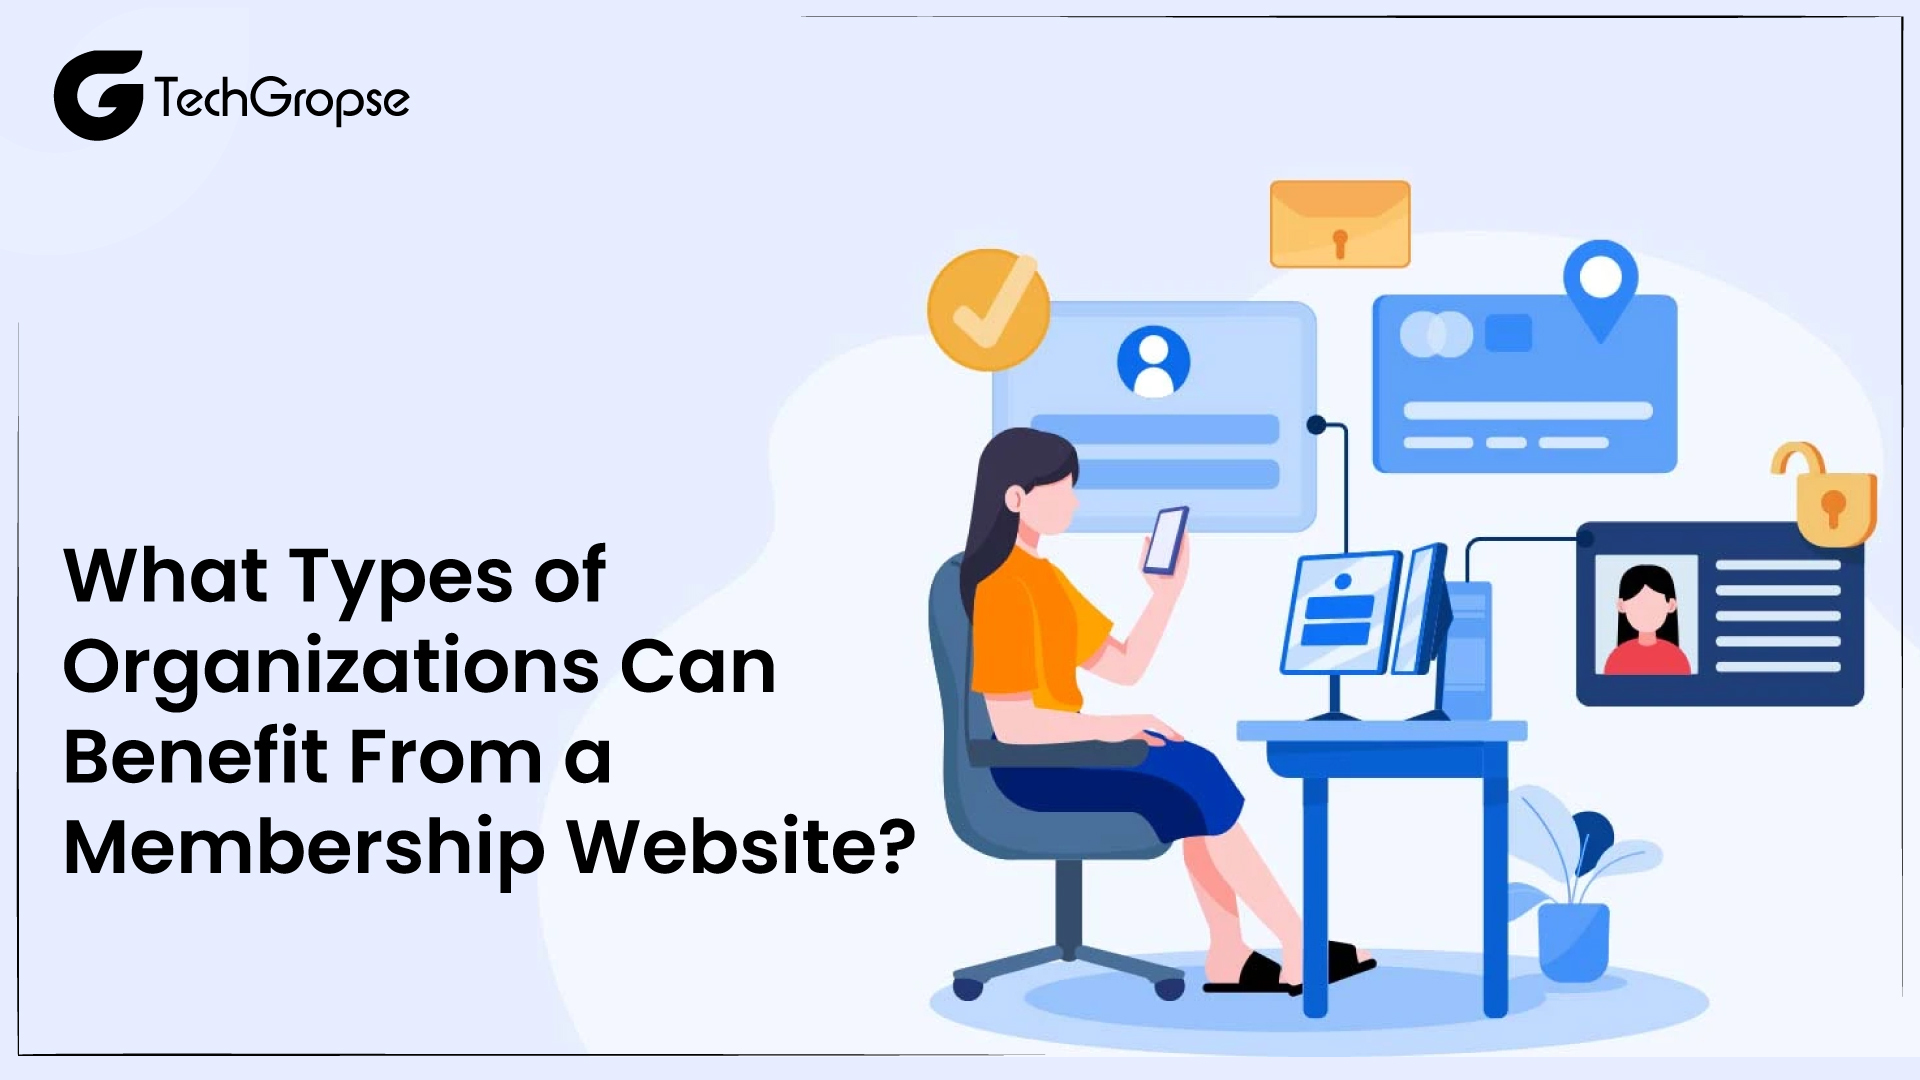 What Types of Organizations Can Benefit From a Membership Website?